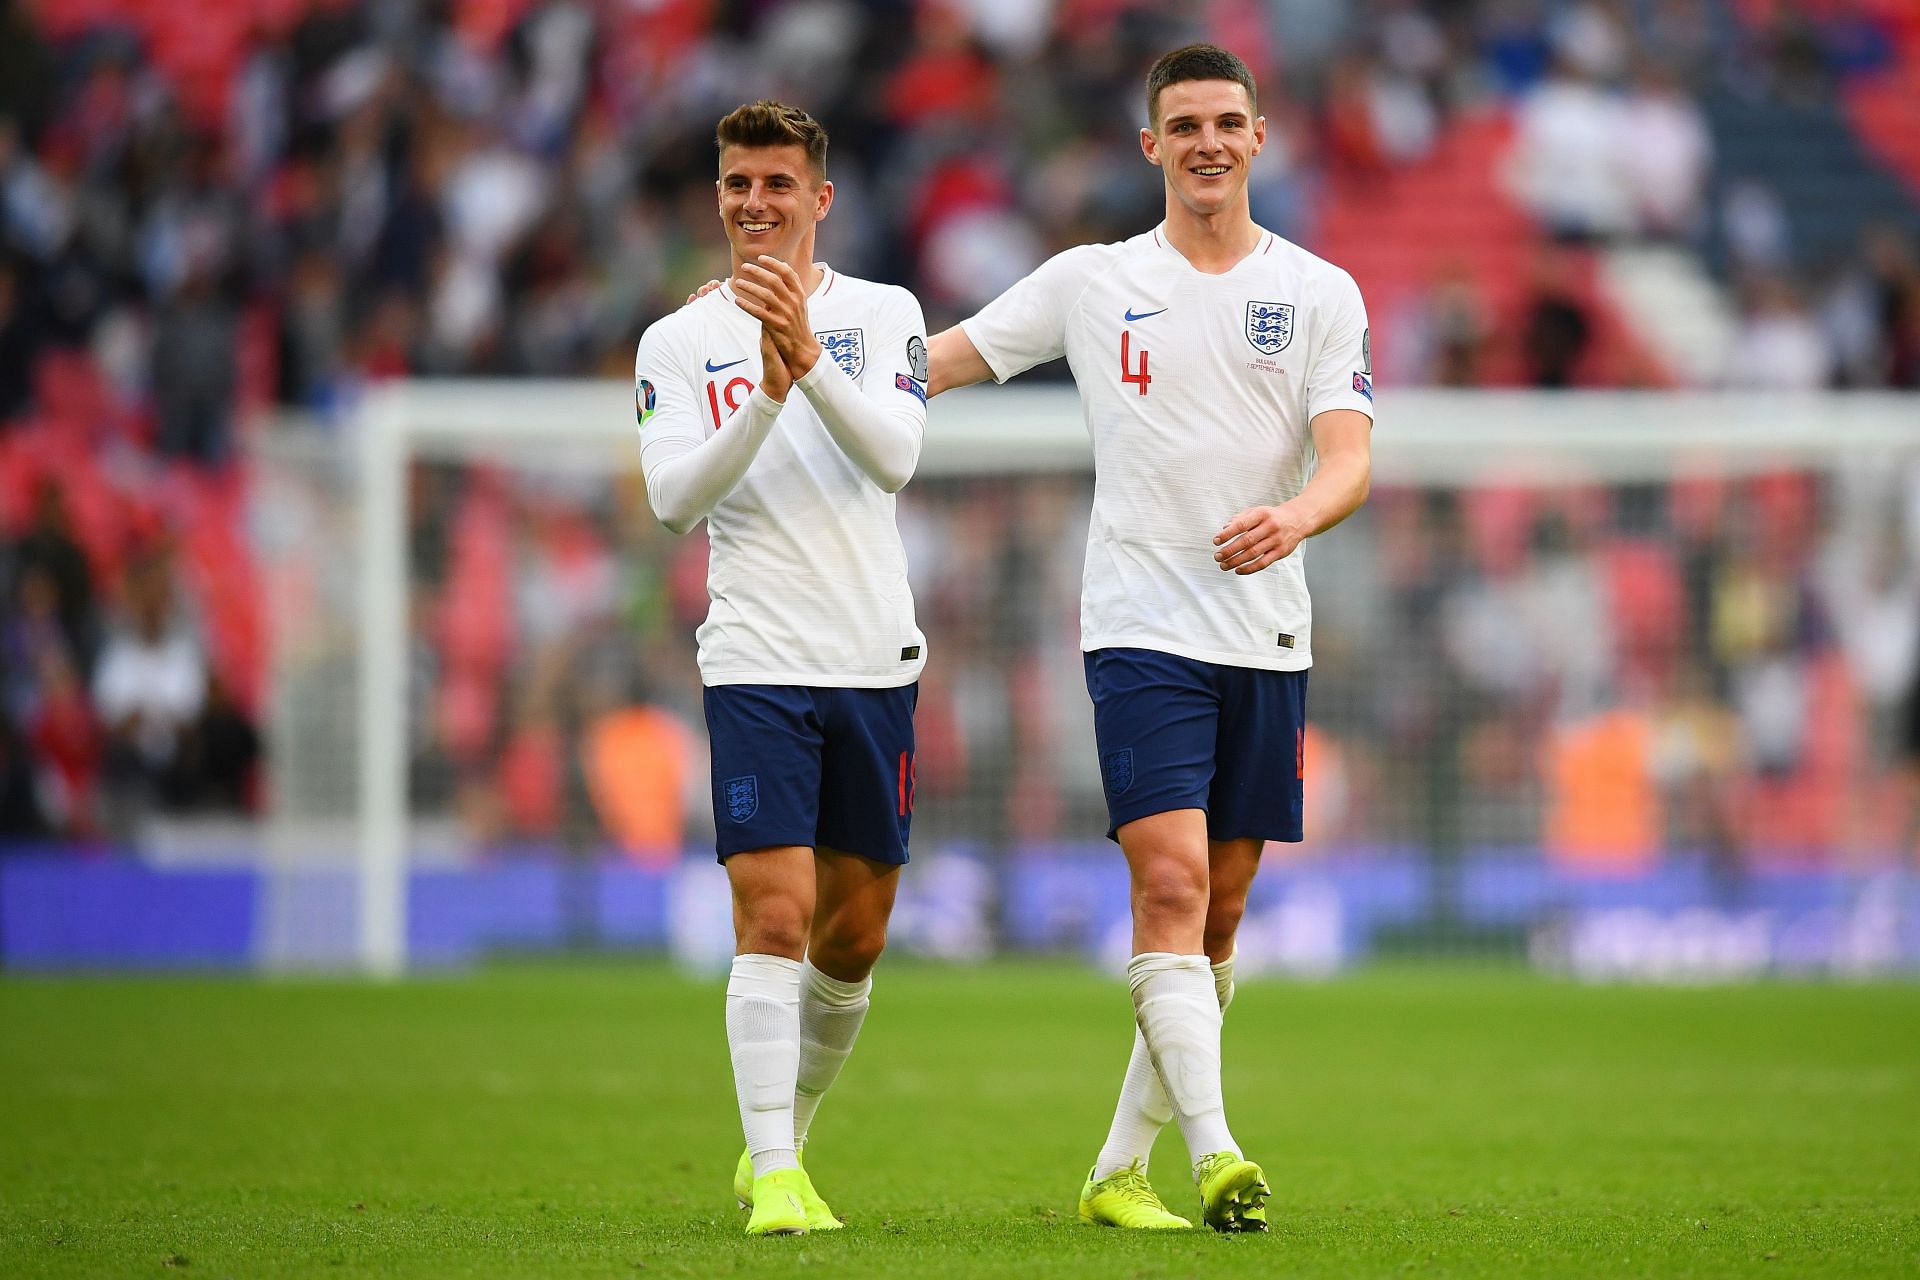 Mason Mount could be instrumental in any move Declan Rice makes this summer